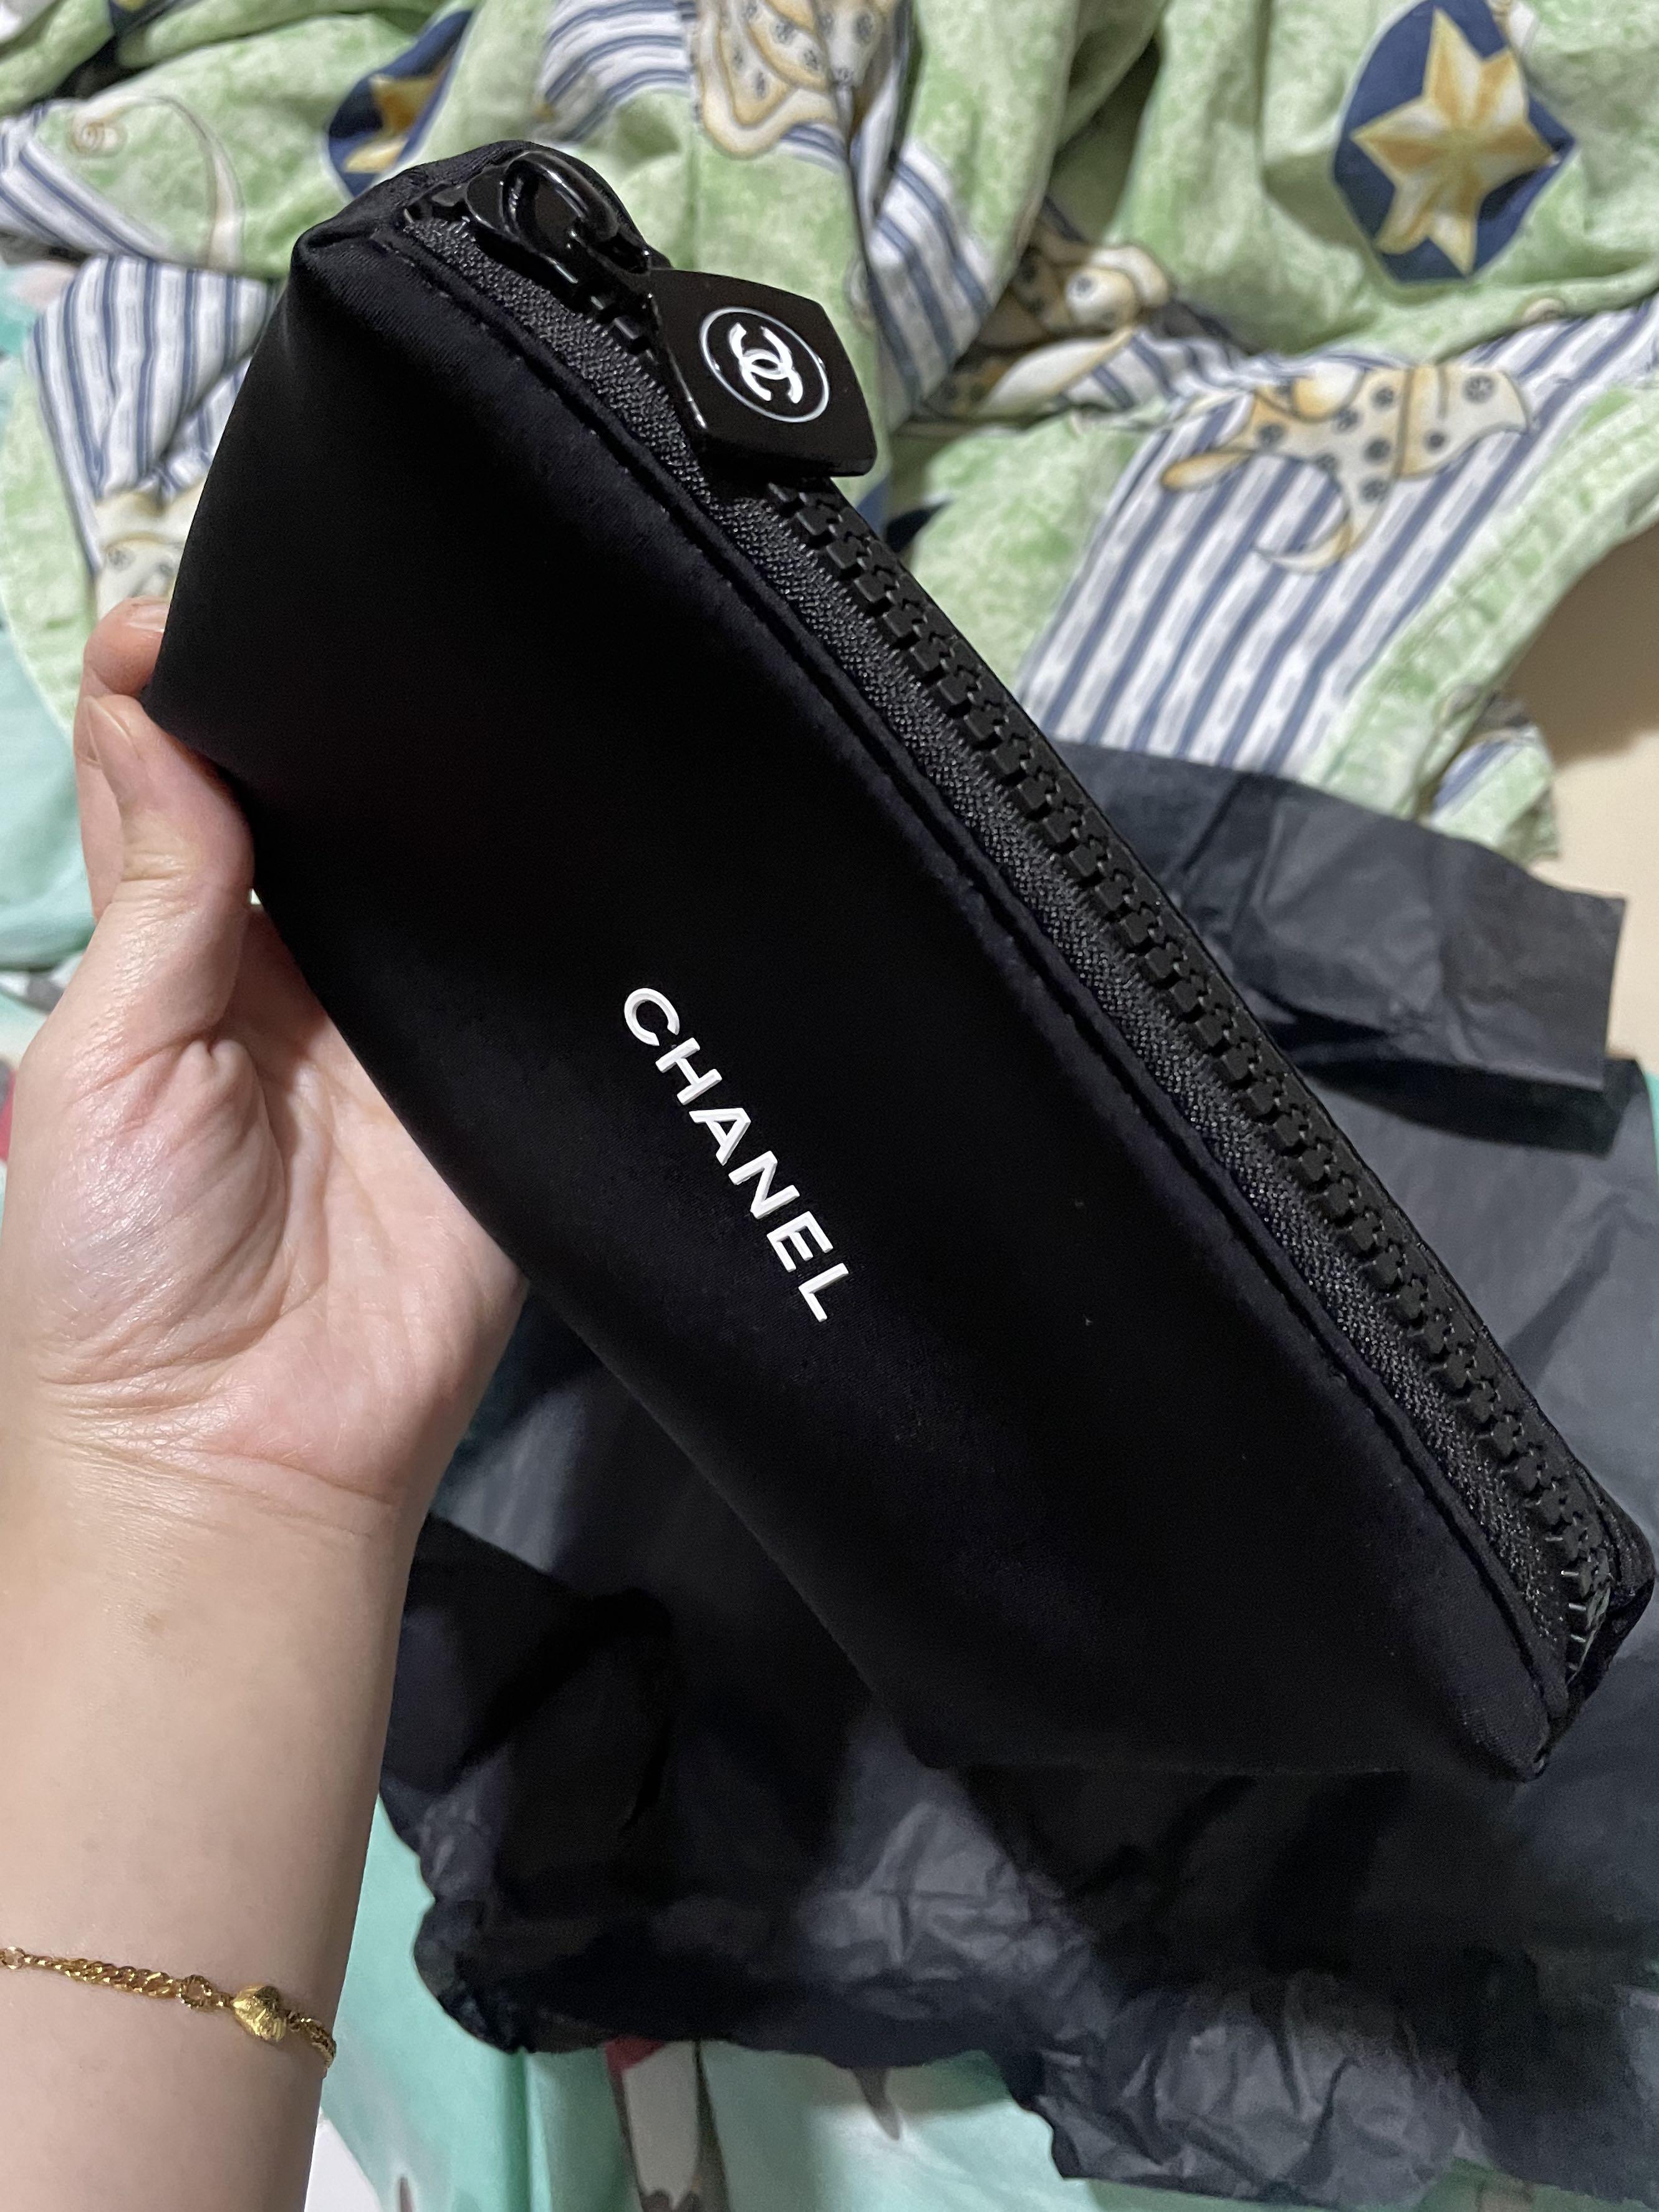 [Authentic] Chanel beaute makeup/cosmetic pouch/accessories/hand carry  pouch bag/ accessories pouch/ gift/storage pouch Black limited edition